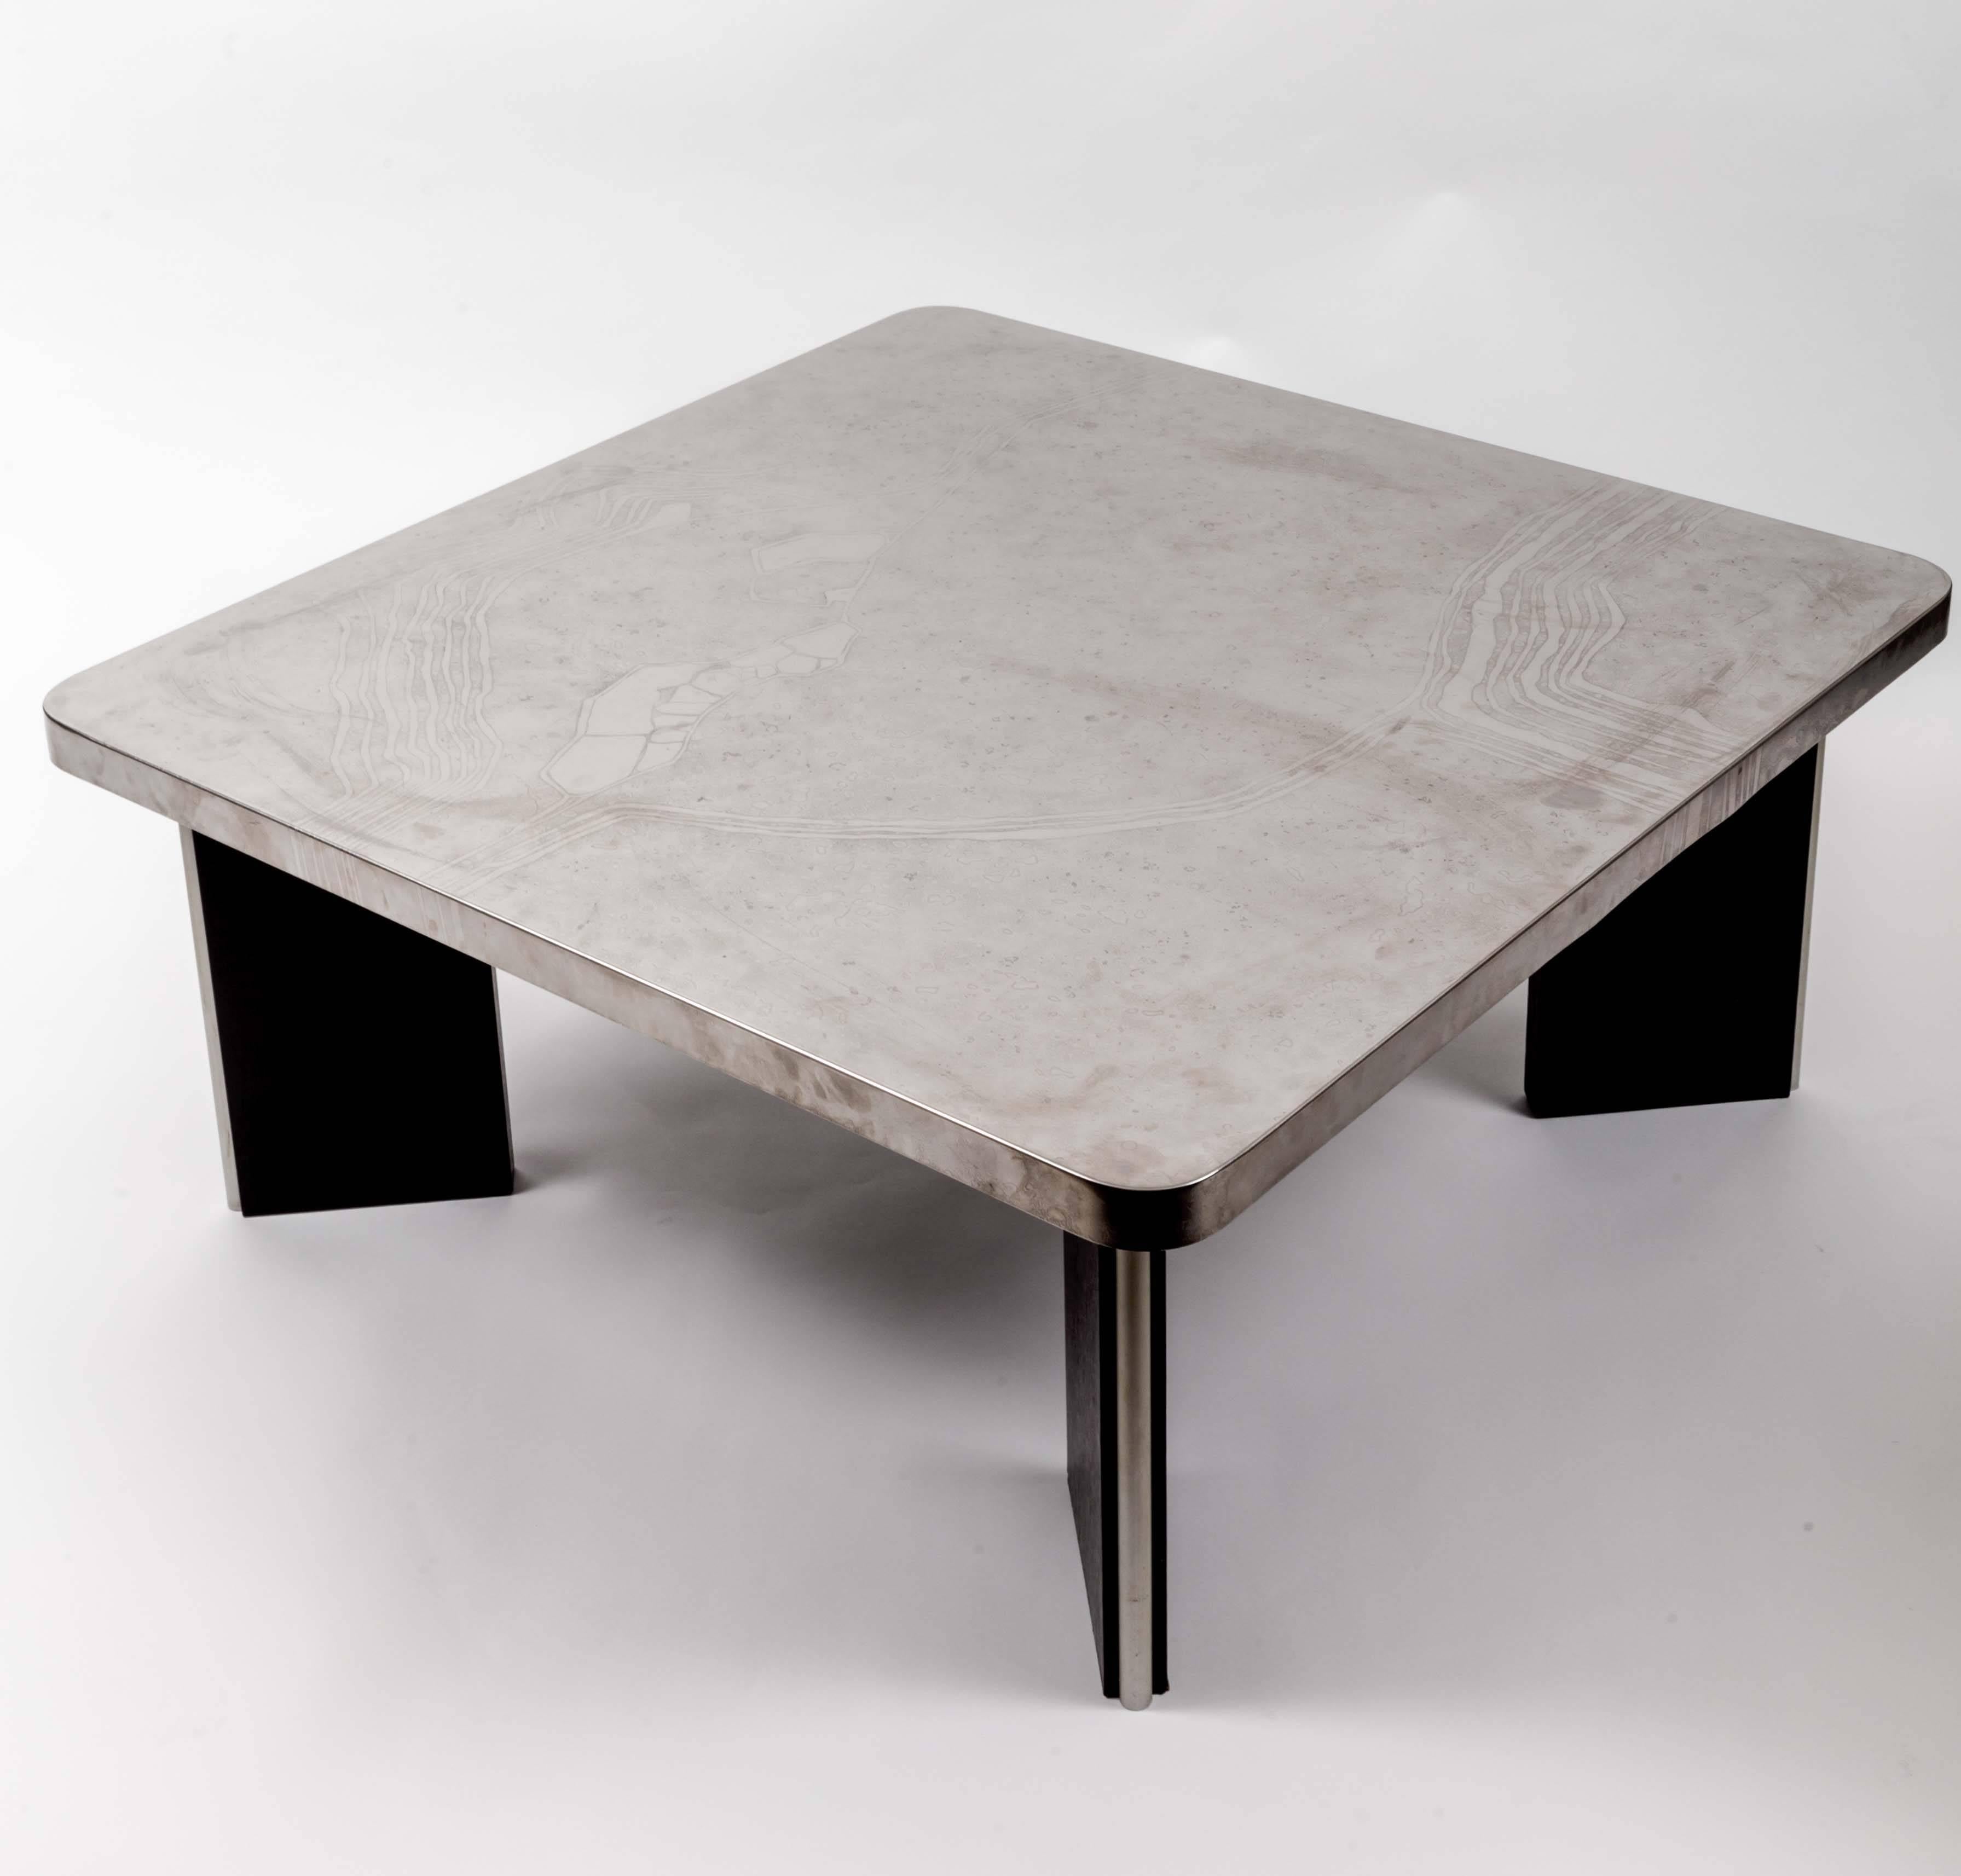 Wooden base with aluminium top.